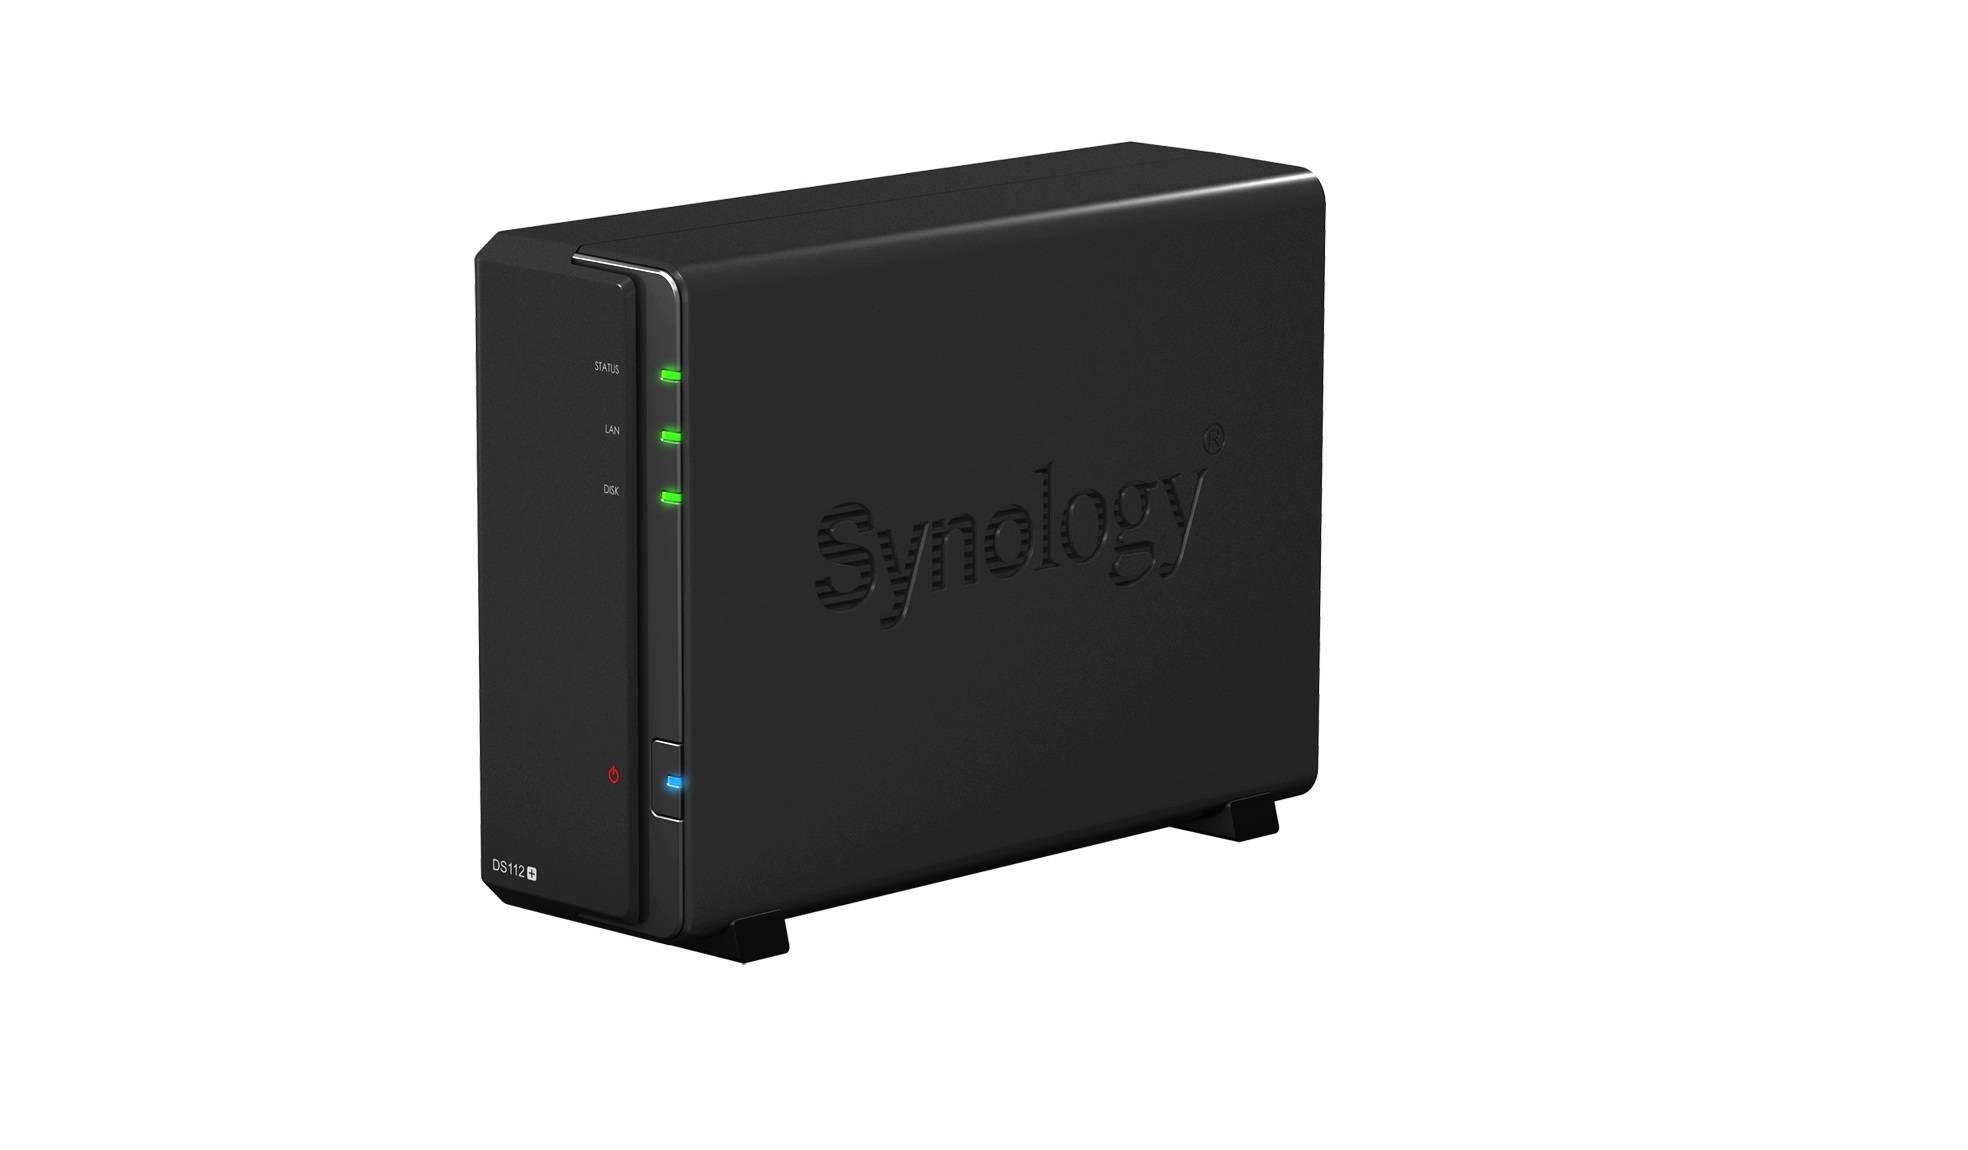 Synology Introduces the DiskStation DS112+ Single Bay NAS Unit